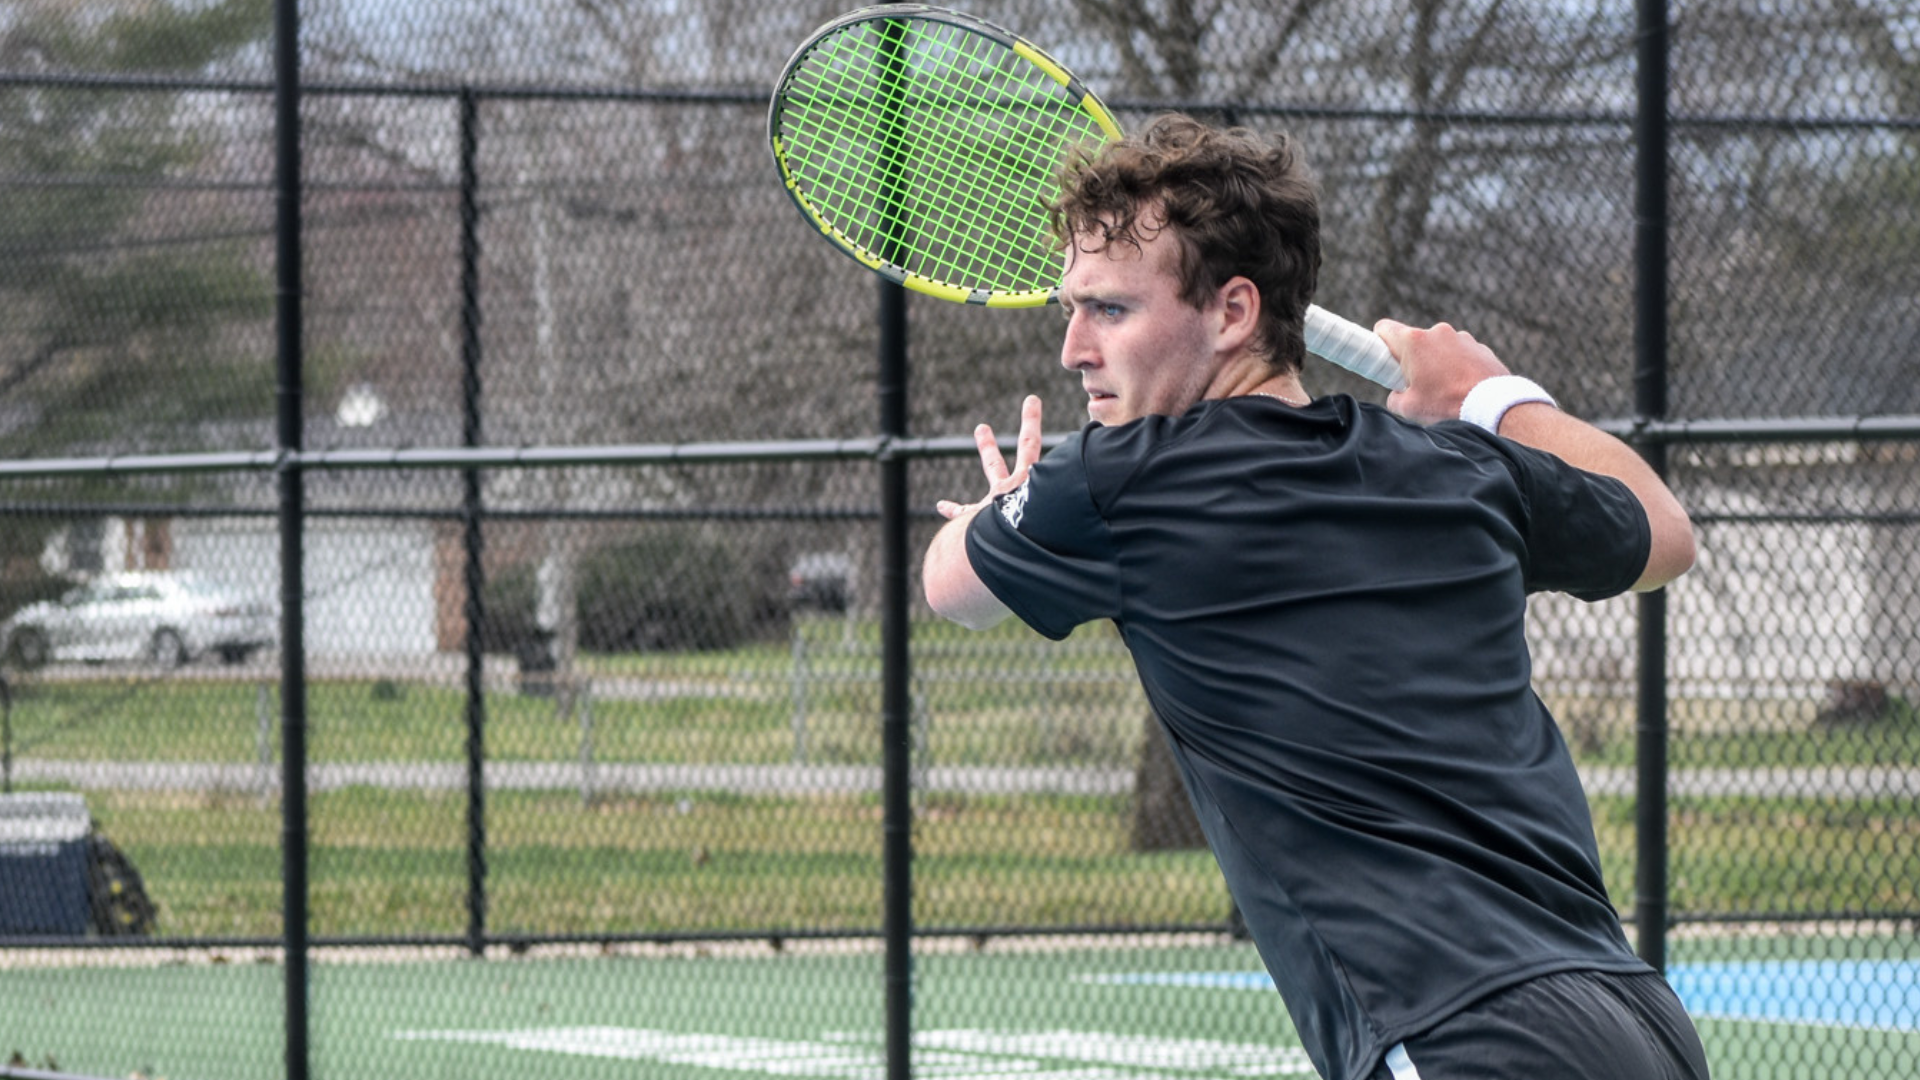 Union men’s tennis ranked at No. 15 in latest NAIA Coaches’ Poll